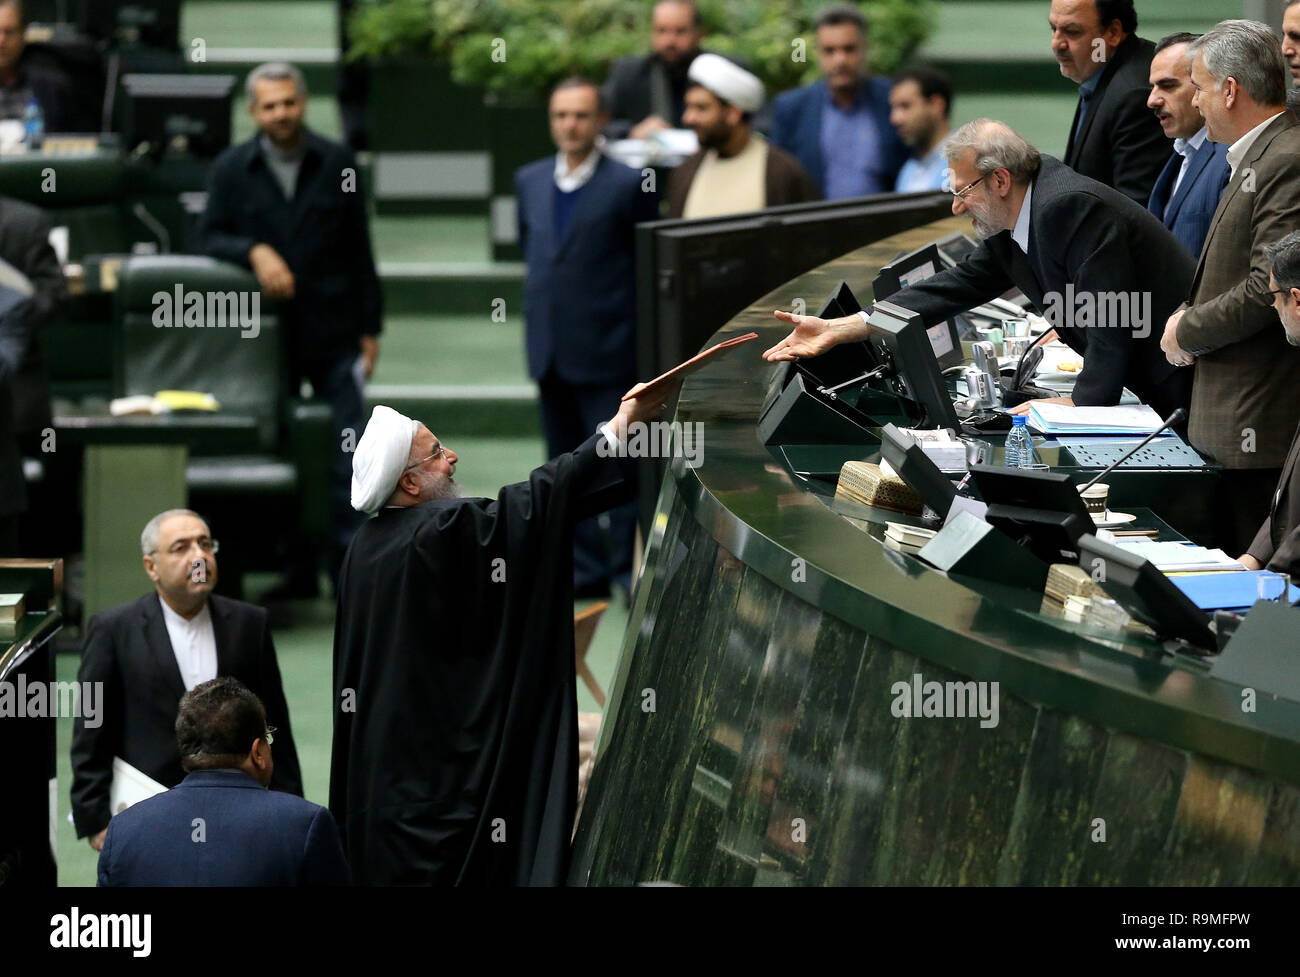 tehran-iran-25th-dec-2018-iranian-president-hassan-rouhani-submits-a-budget-bill-to-iranian-parliament-speaker-ali-larijani-during-a-session-at-the-parliament-in-tehran-iran-on-dec-25-2018-rouhani-said-on-tuesday-that-the-us-oppressive-sanction-pressures-against-iran-wont-achieve-their-ends-credit-ahmad-halabisazxinhuaalamy-live-news-R9MFPW.jpg